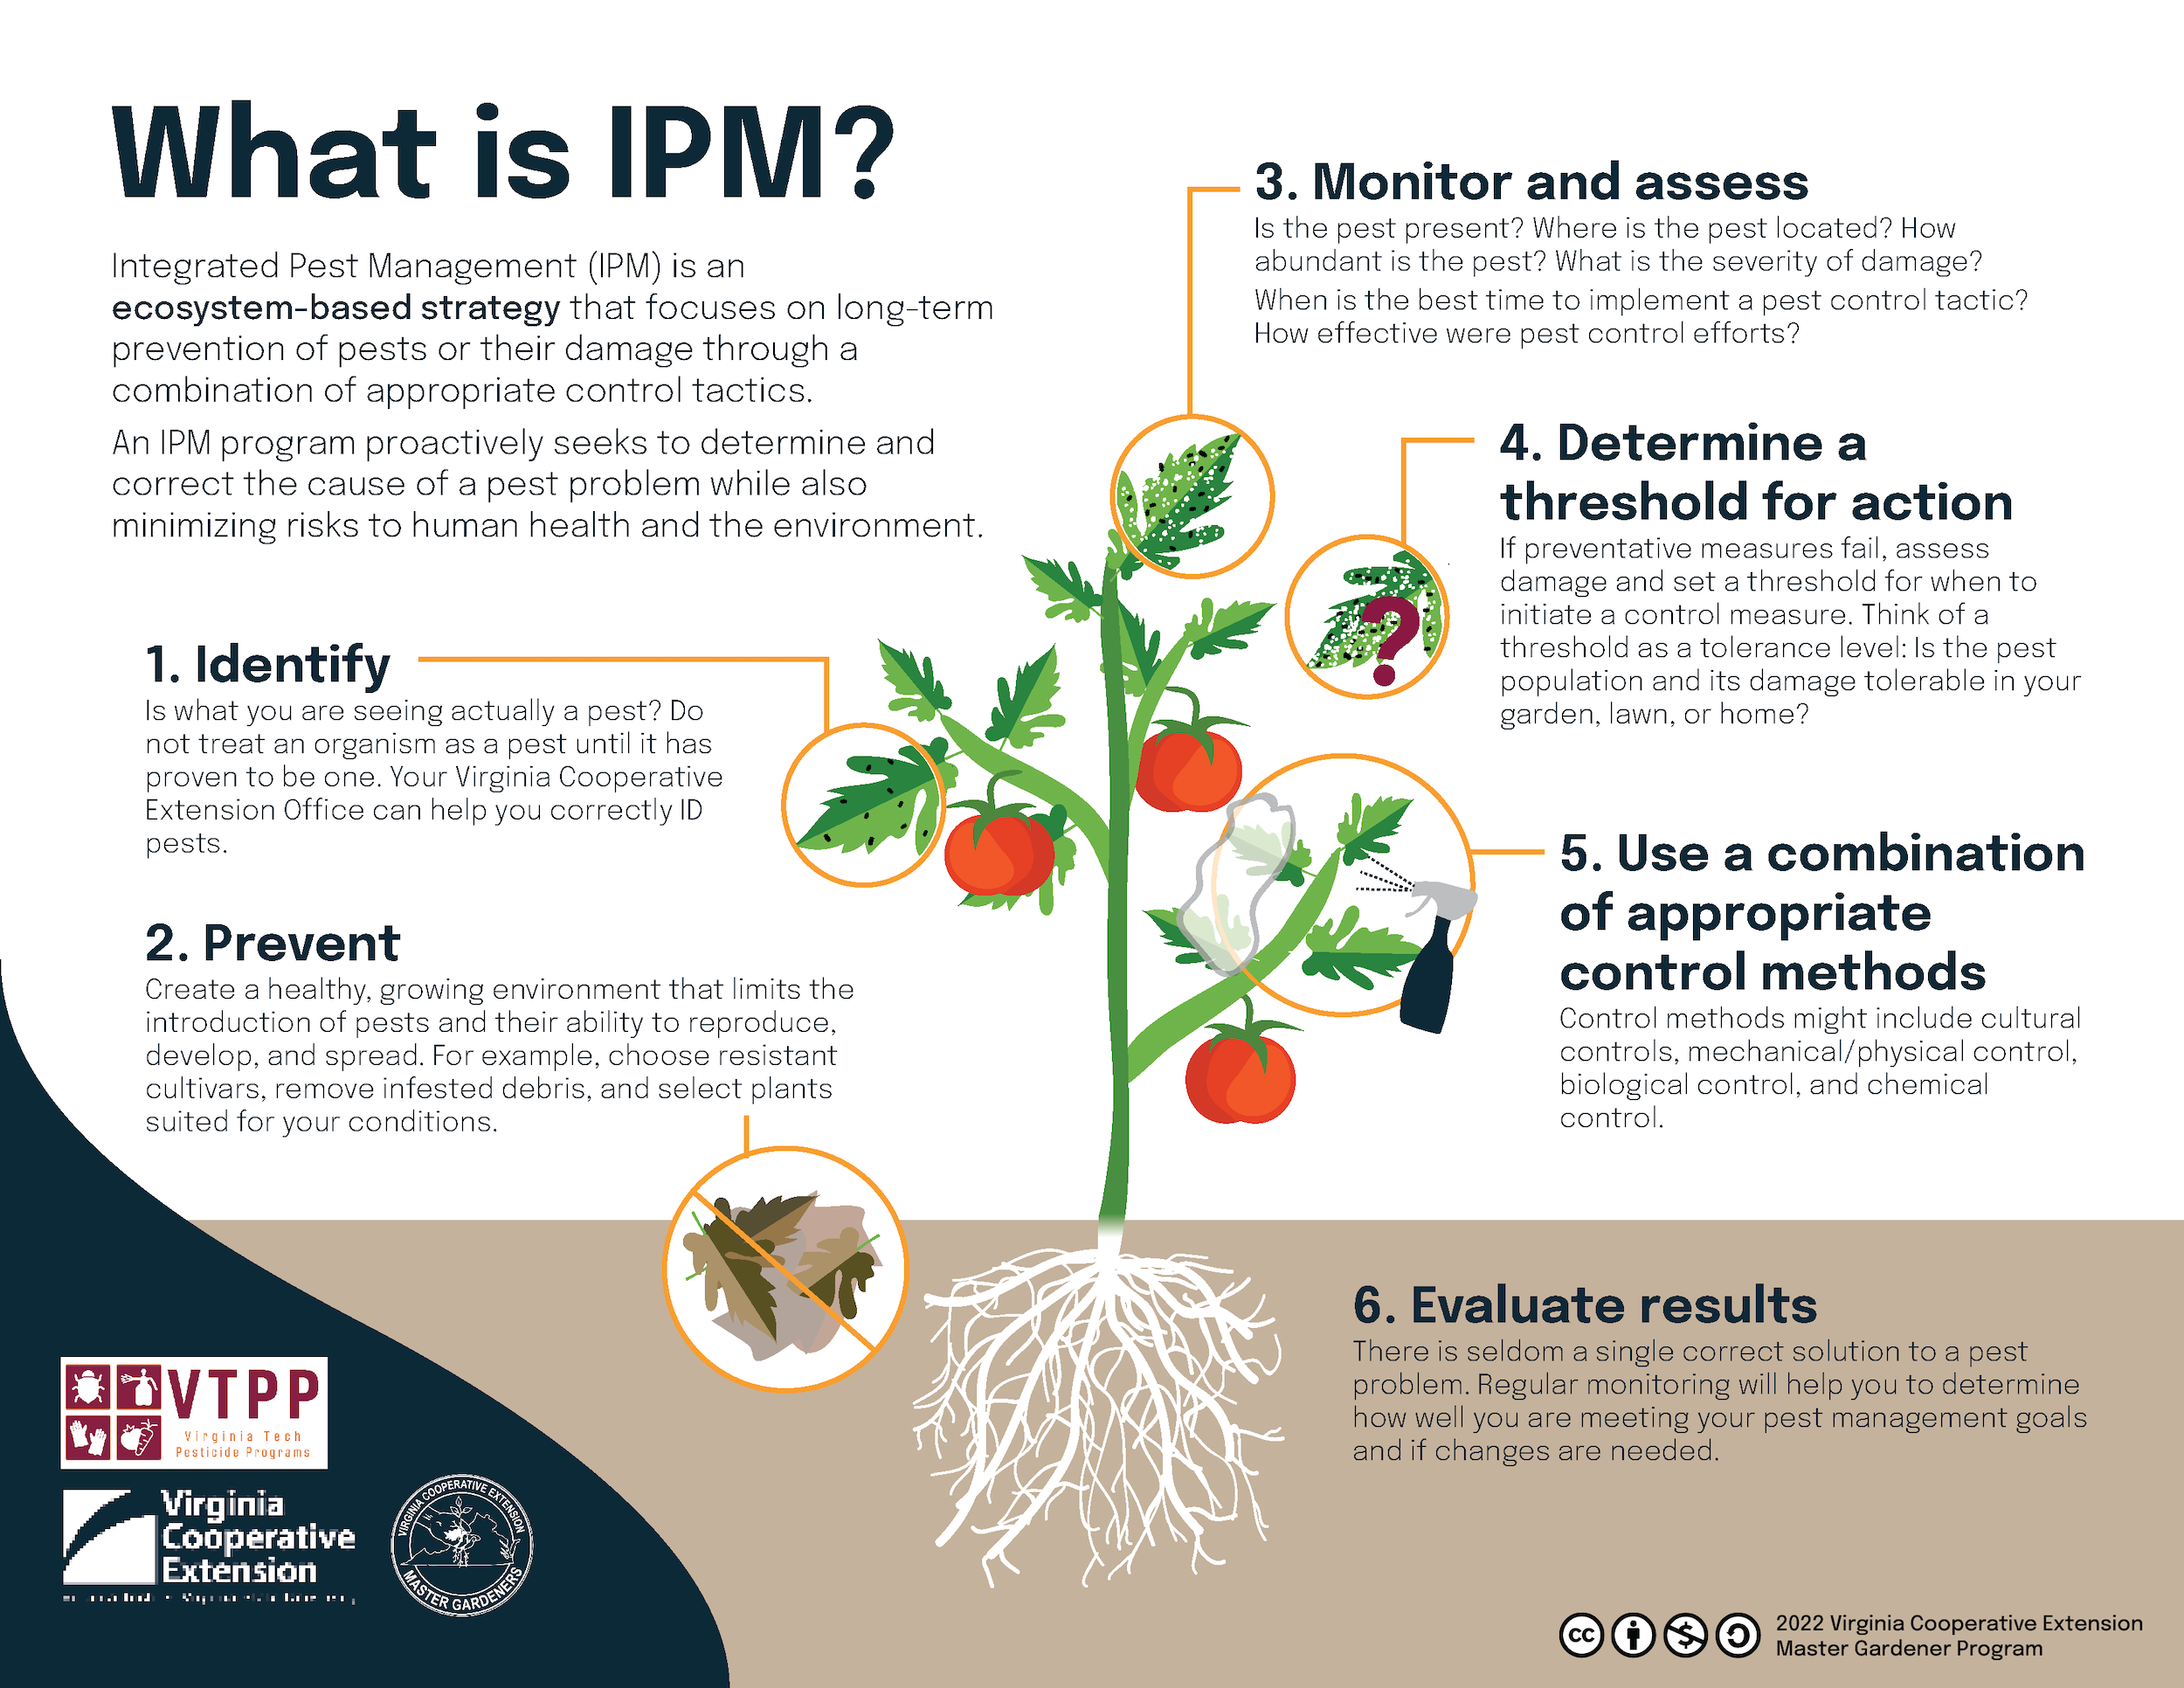 A diagram labeled as "What is IPM?" Text reads: An IPM program proactively seeks to determine and correct the cause of a pest problem while also minimizing risks to human health and the environment. There are six steps within the decision process. The focus of the six steps is a cartoon drawing of a tomato plant; showing roots in white, stem and leaves in green with three branches, and one tomato colored in red per branch. Step one is "Identify"; Is what you are seeing actually a pest? Do not treat an organism as a pest until it has proven to be one. Your Virginia Cooperative Extension Office can help you correctly ID pests; this step focuses on a green tomato plant leaf with small black spots. Step two is "Prevent"; Create healthy, growing environment that limits the introduction of pests and their ability to reproduce, develop, and spread. For example, choose resistant cultivars, remove infested debris, and select plants suited for your conditions; this step focuses on a crosses out cartoon drawing of brown,dead leaves. Step three is "Monitor and Assess"; Is the pest present? Where is the pest located? How abundant is the pest? What is the severity of damage? When is the best time to implement a pest control tactic? How effective were pest control effects?; this step focuses on a damaged tomato leaf with black spots and holes in the leaf. Step four is "Determine a threshold for action"; If preventative measures fail assess damage and set a threshold for when to initiate a control measure. Think of a threshold as a tolerance level: is the pest population and its damage tolerable in your garden, lawn, or home?; this step focuses on a damage tomato leaf with black spots and holes covered by a purple question mark. Step five is "Use of combination of appropriate control methods"; control methods might include cultural controls, mechanical/physical control, biological control, and chemical control; this step focuses on a cartoon drawing of the tomato leaves with a spray bottle and white rag showing "cleaning" of the plant. Step six is "Evaluate results"; There is seldom a single correct solution to a pest problem. Regular monitoring will help you to determine how well you are meeting your pest management goals and if changes are needed.